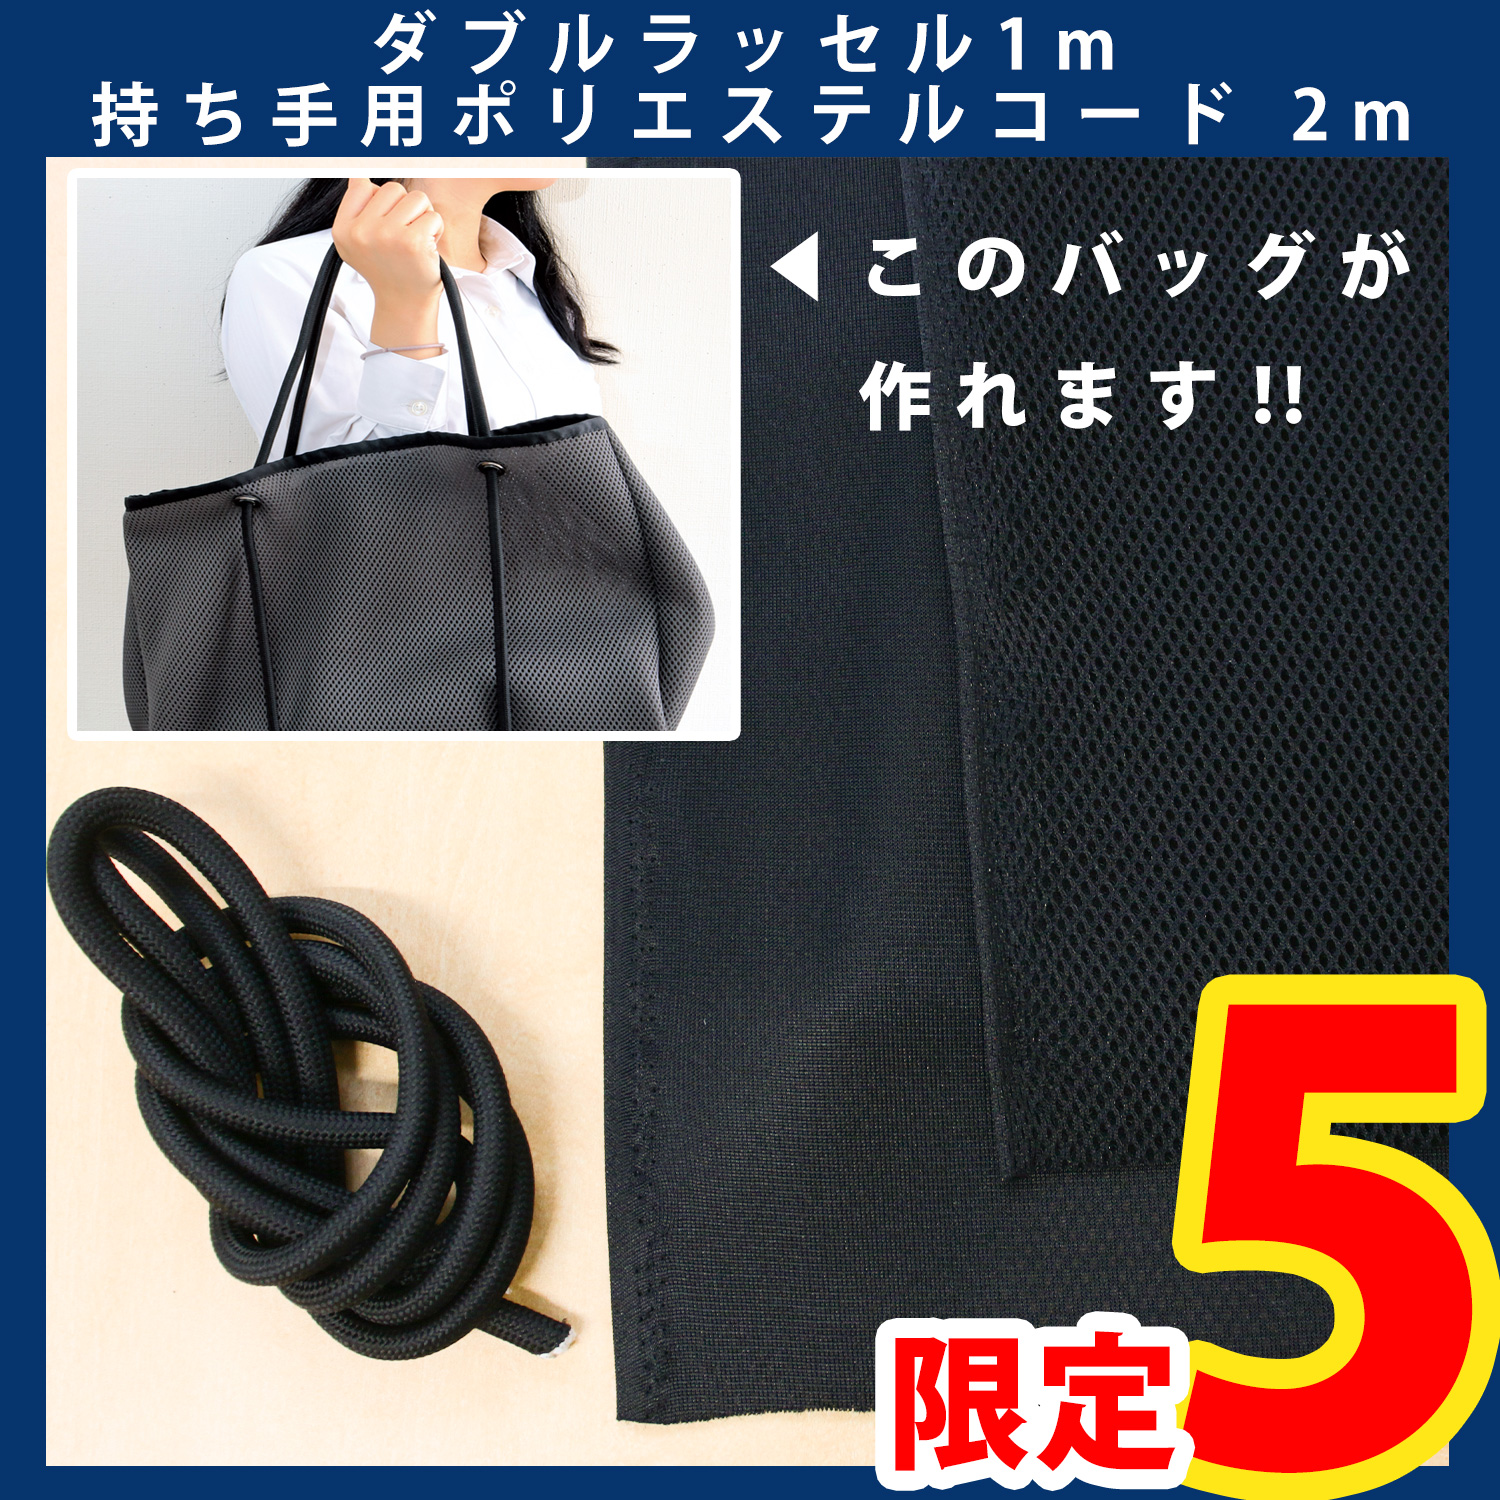 【Pre-order】ORC566 Double Russell 1m Polyester cord for handle 2m (set)